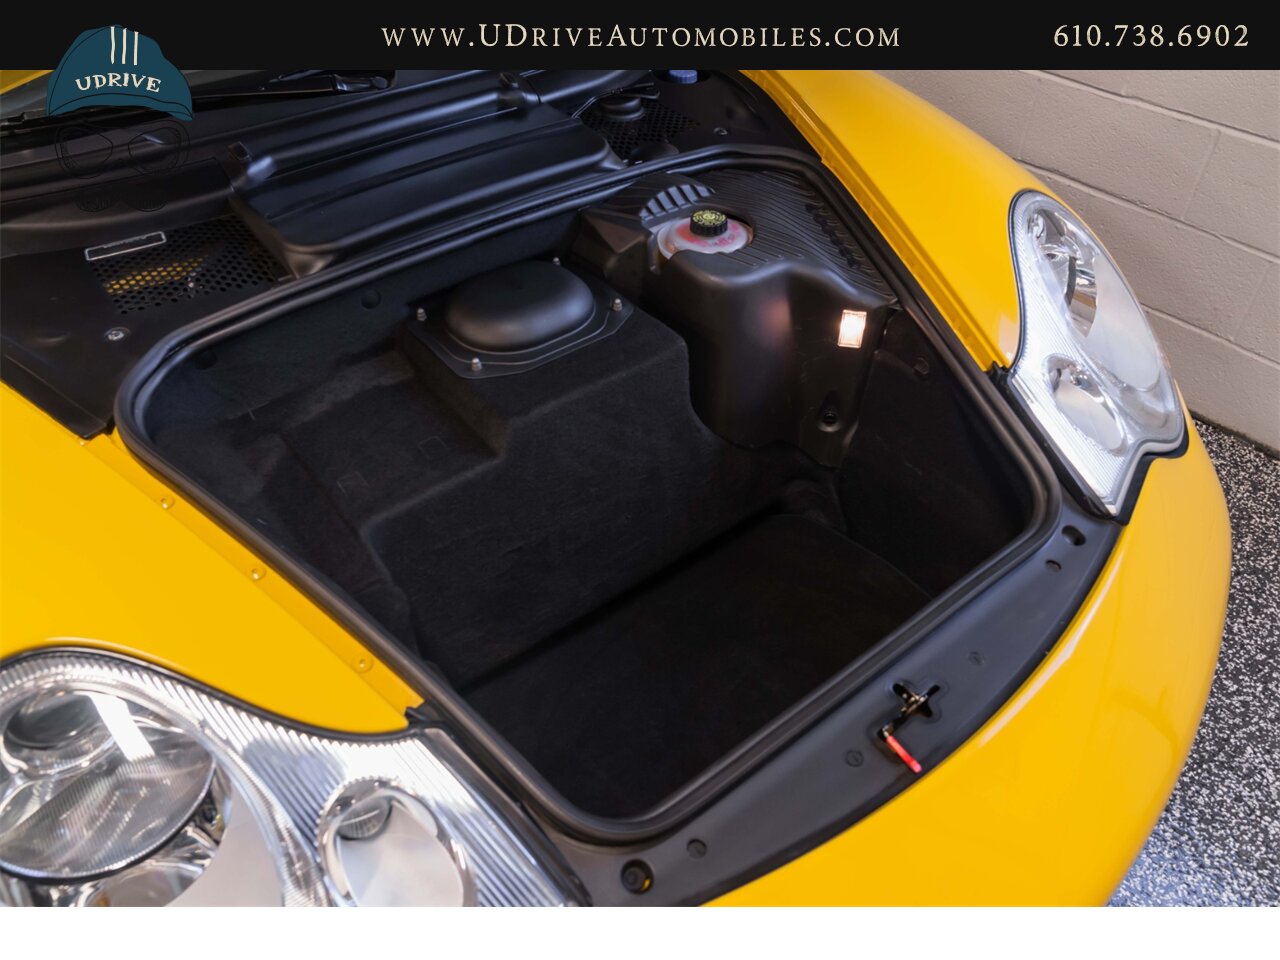 2005 Porsche 911 GT3 996 Speed Yellow Sport Seats Pntd Hardbacks  Pntd Console Deviating Stitch Yellow Accents Throughout - Photo 47 - West Chester, PA 19382